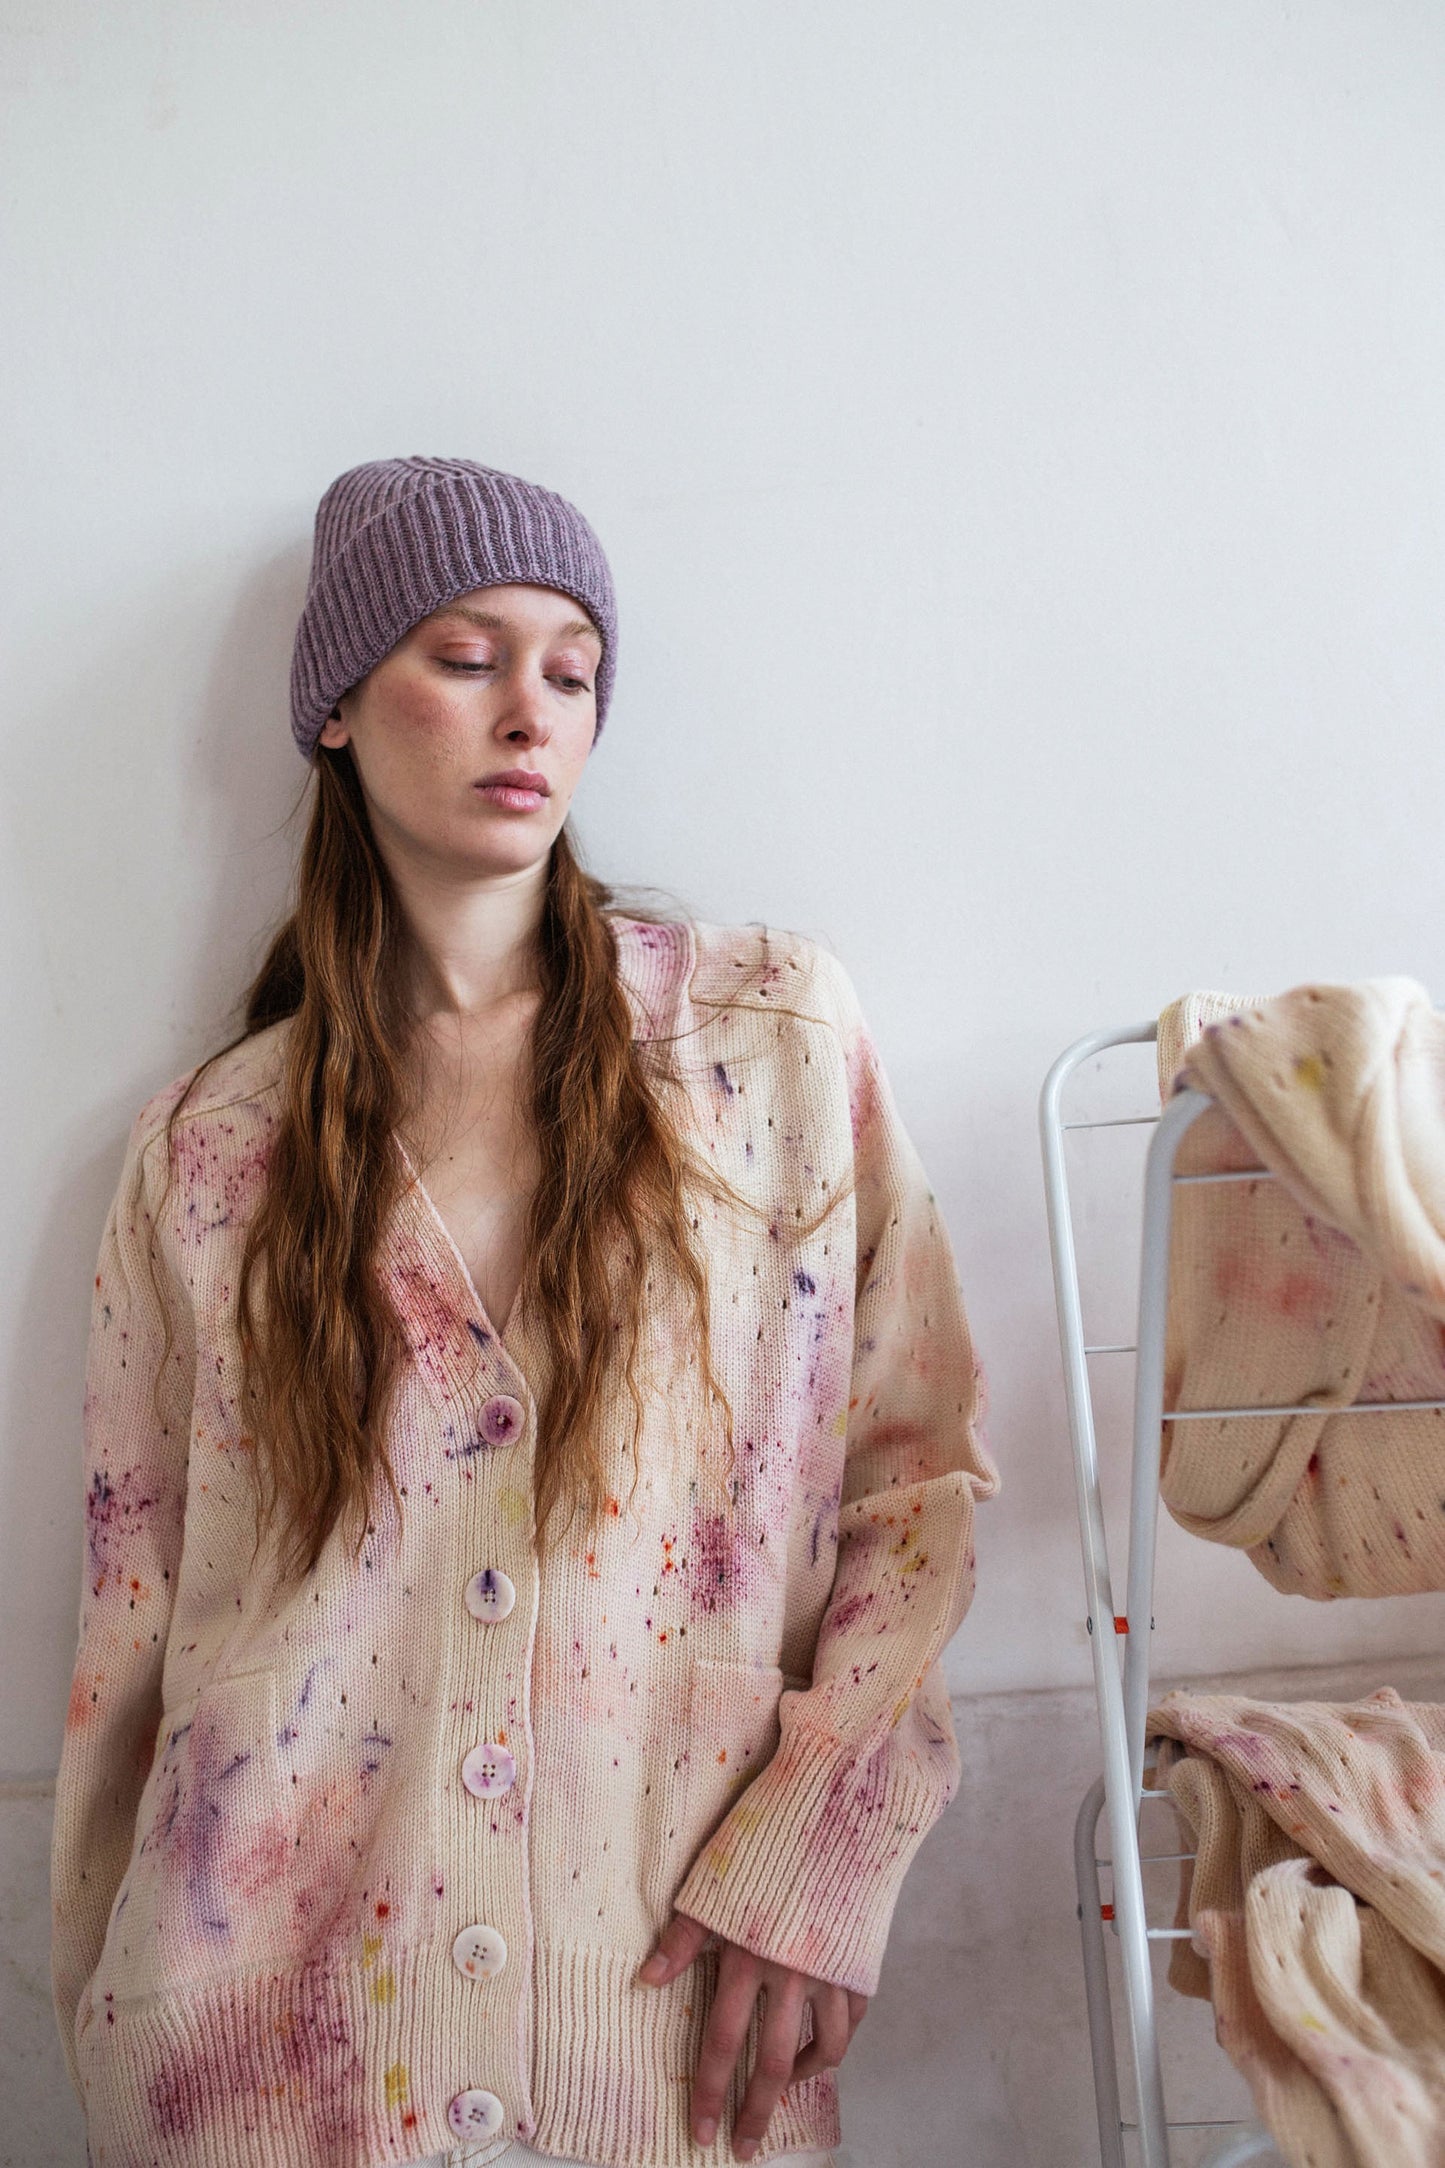 Floca x Studio Folklore Hand-dyed with botanical ingredients